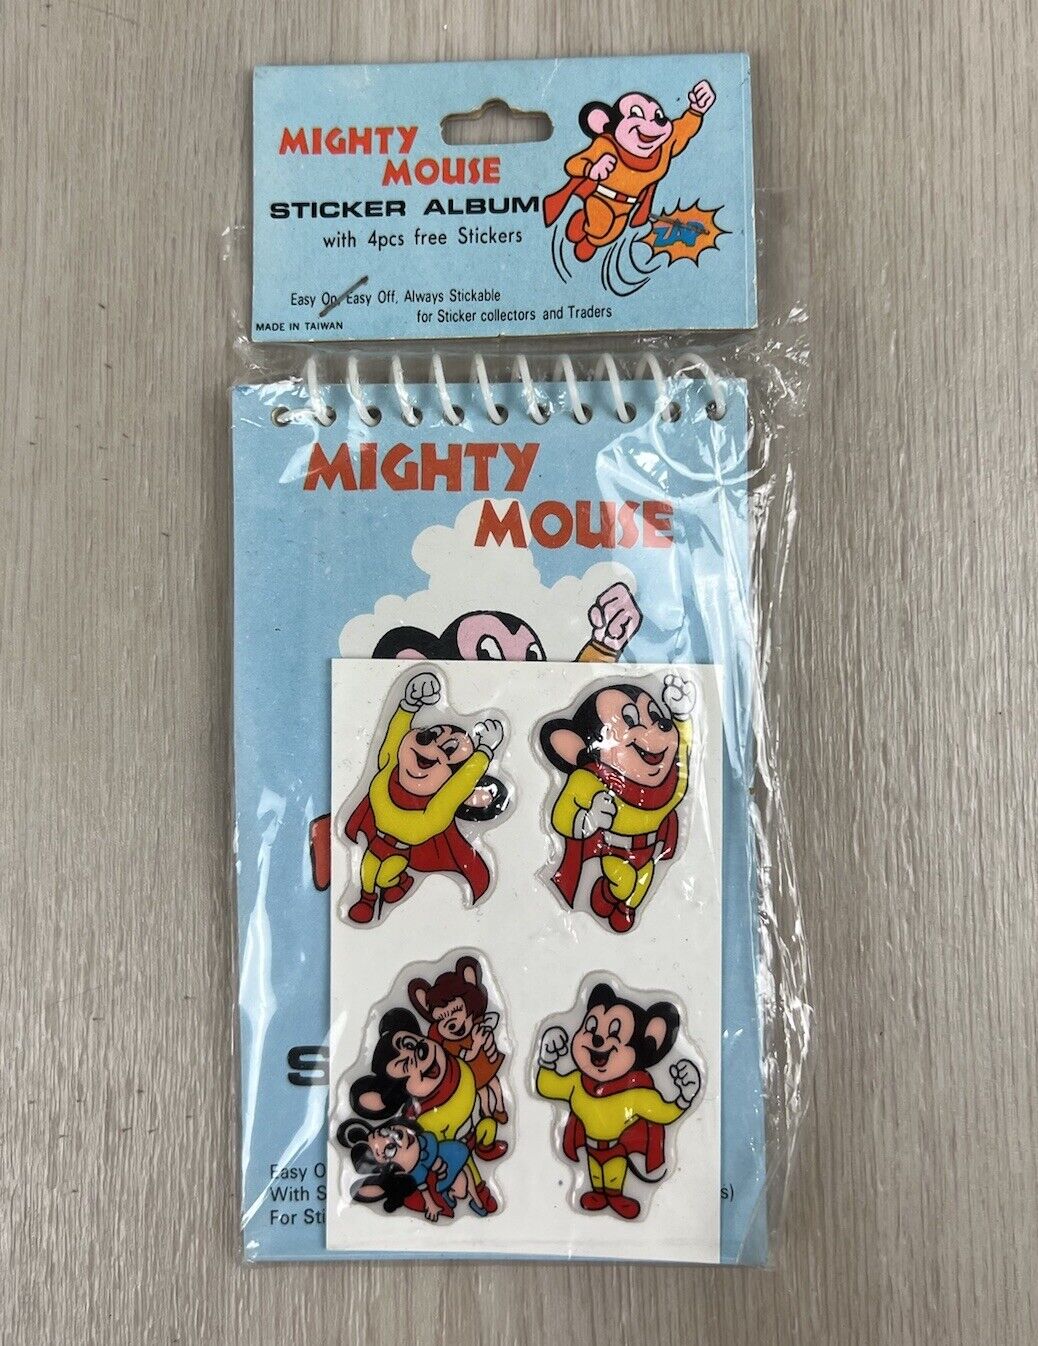 Vintage 1983 Mighty Mouse Sticker Album Sealed in Plastic Brand New